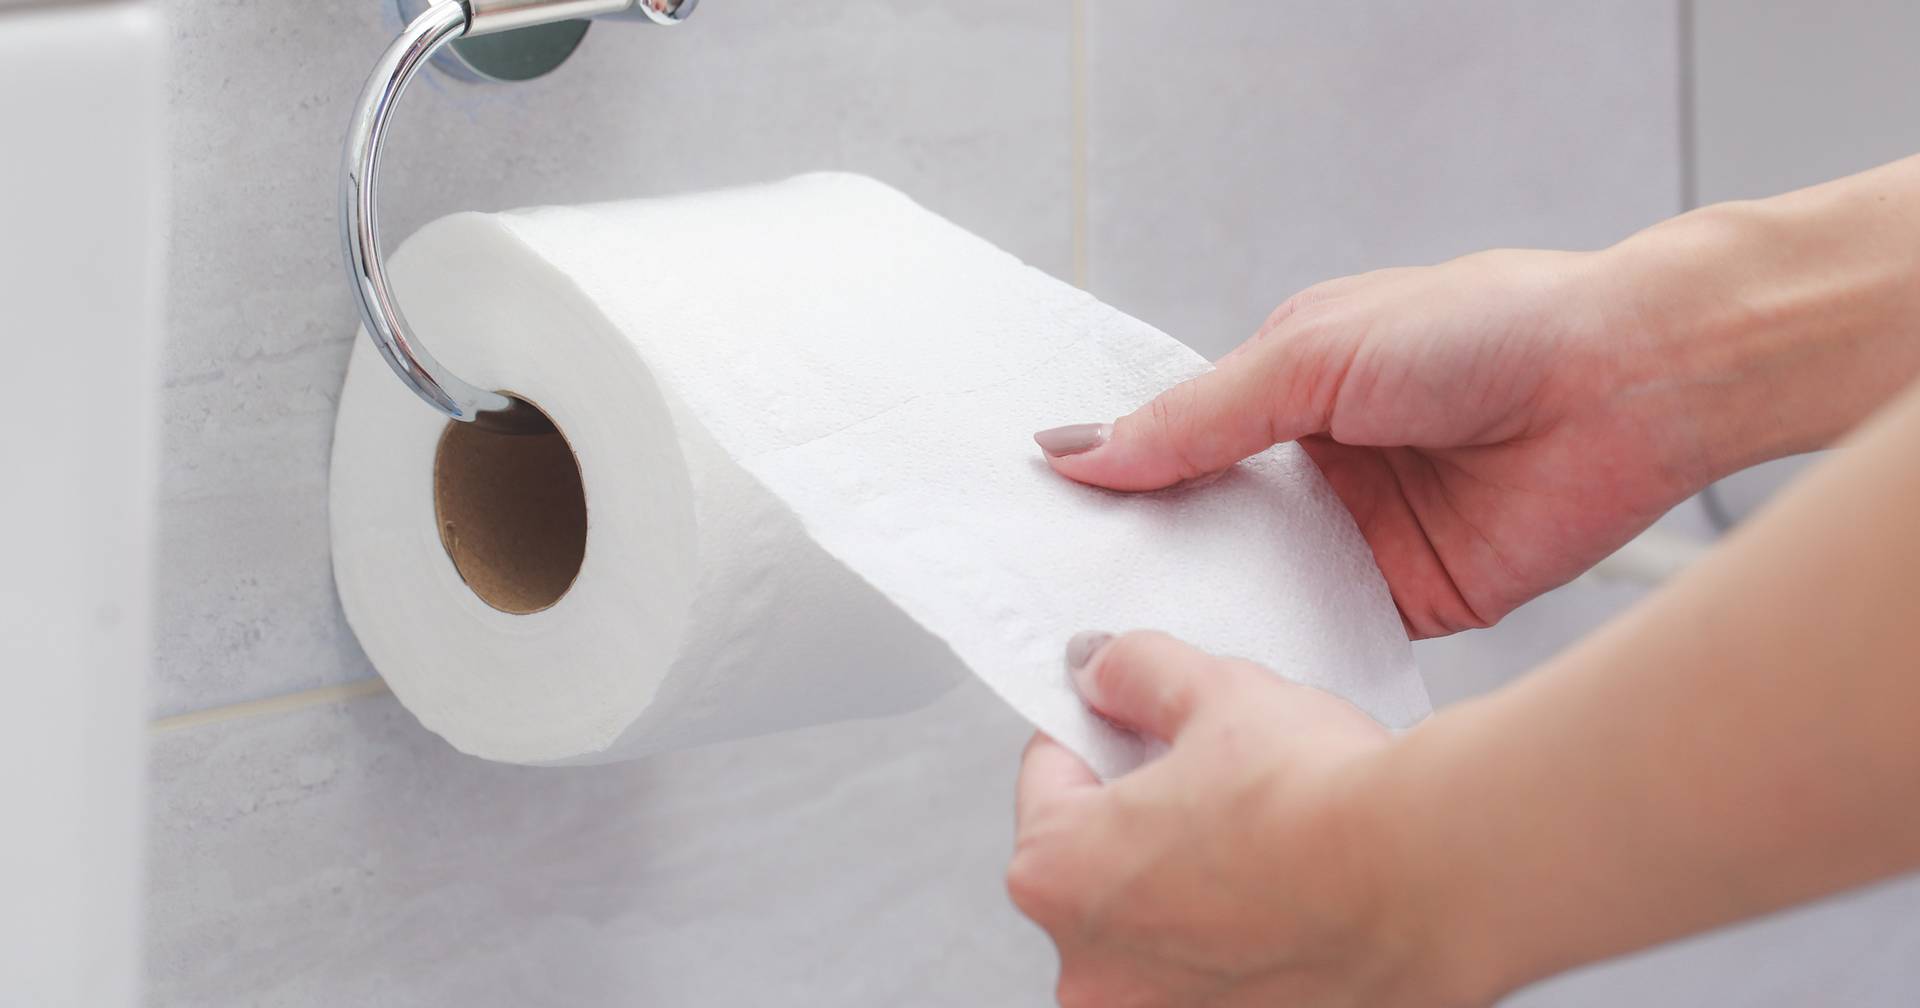 Toilet paper: An unexpected source of persistent chemicals